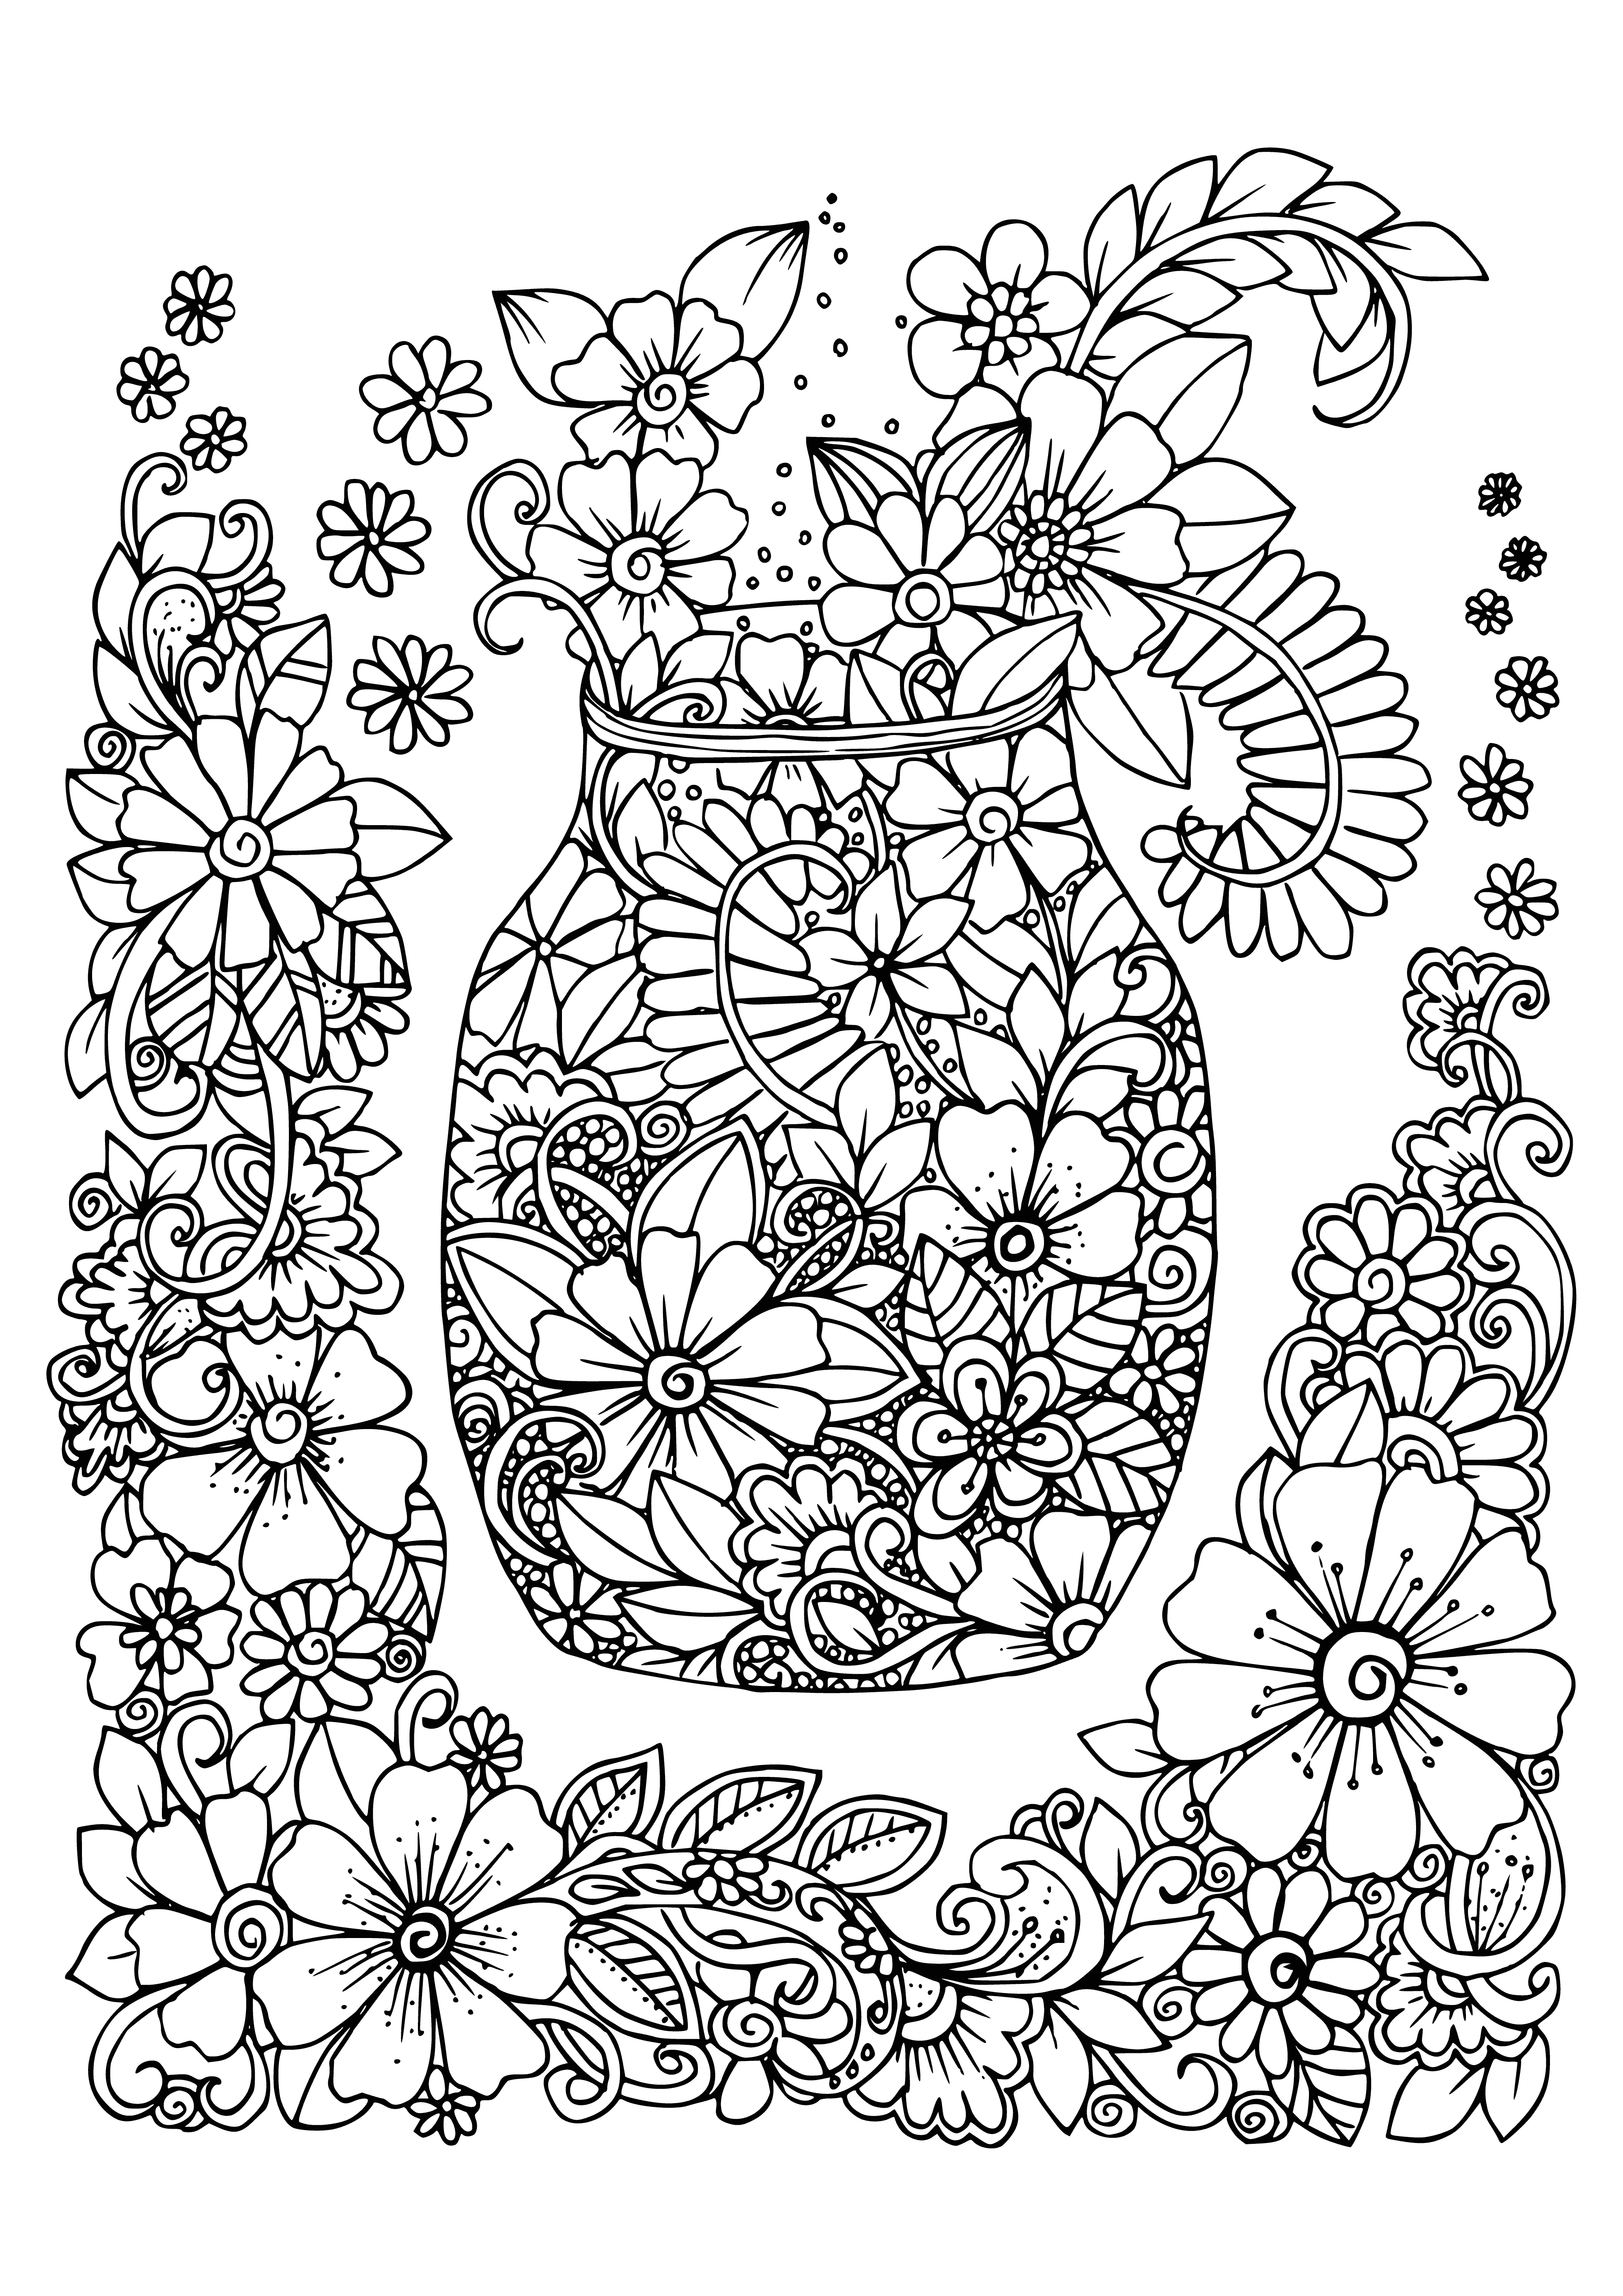 coloring page: A flower adult coloring page with many different flowers in a design, each with its own unique color. #AdultColoring